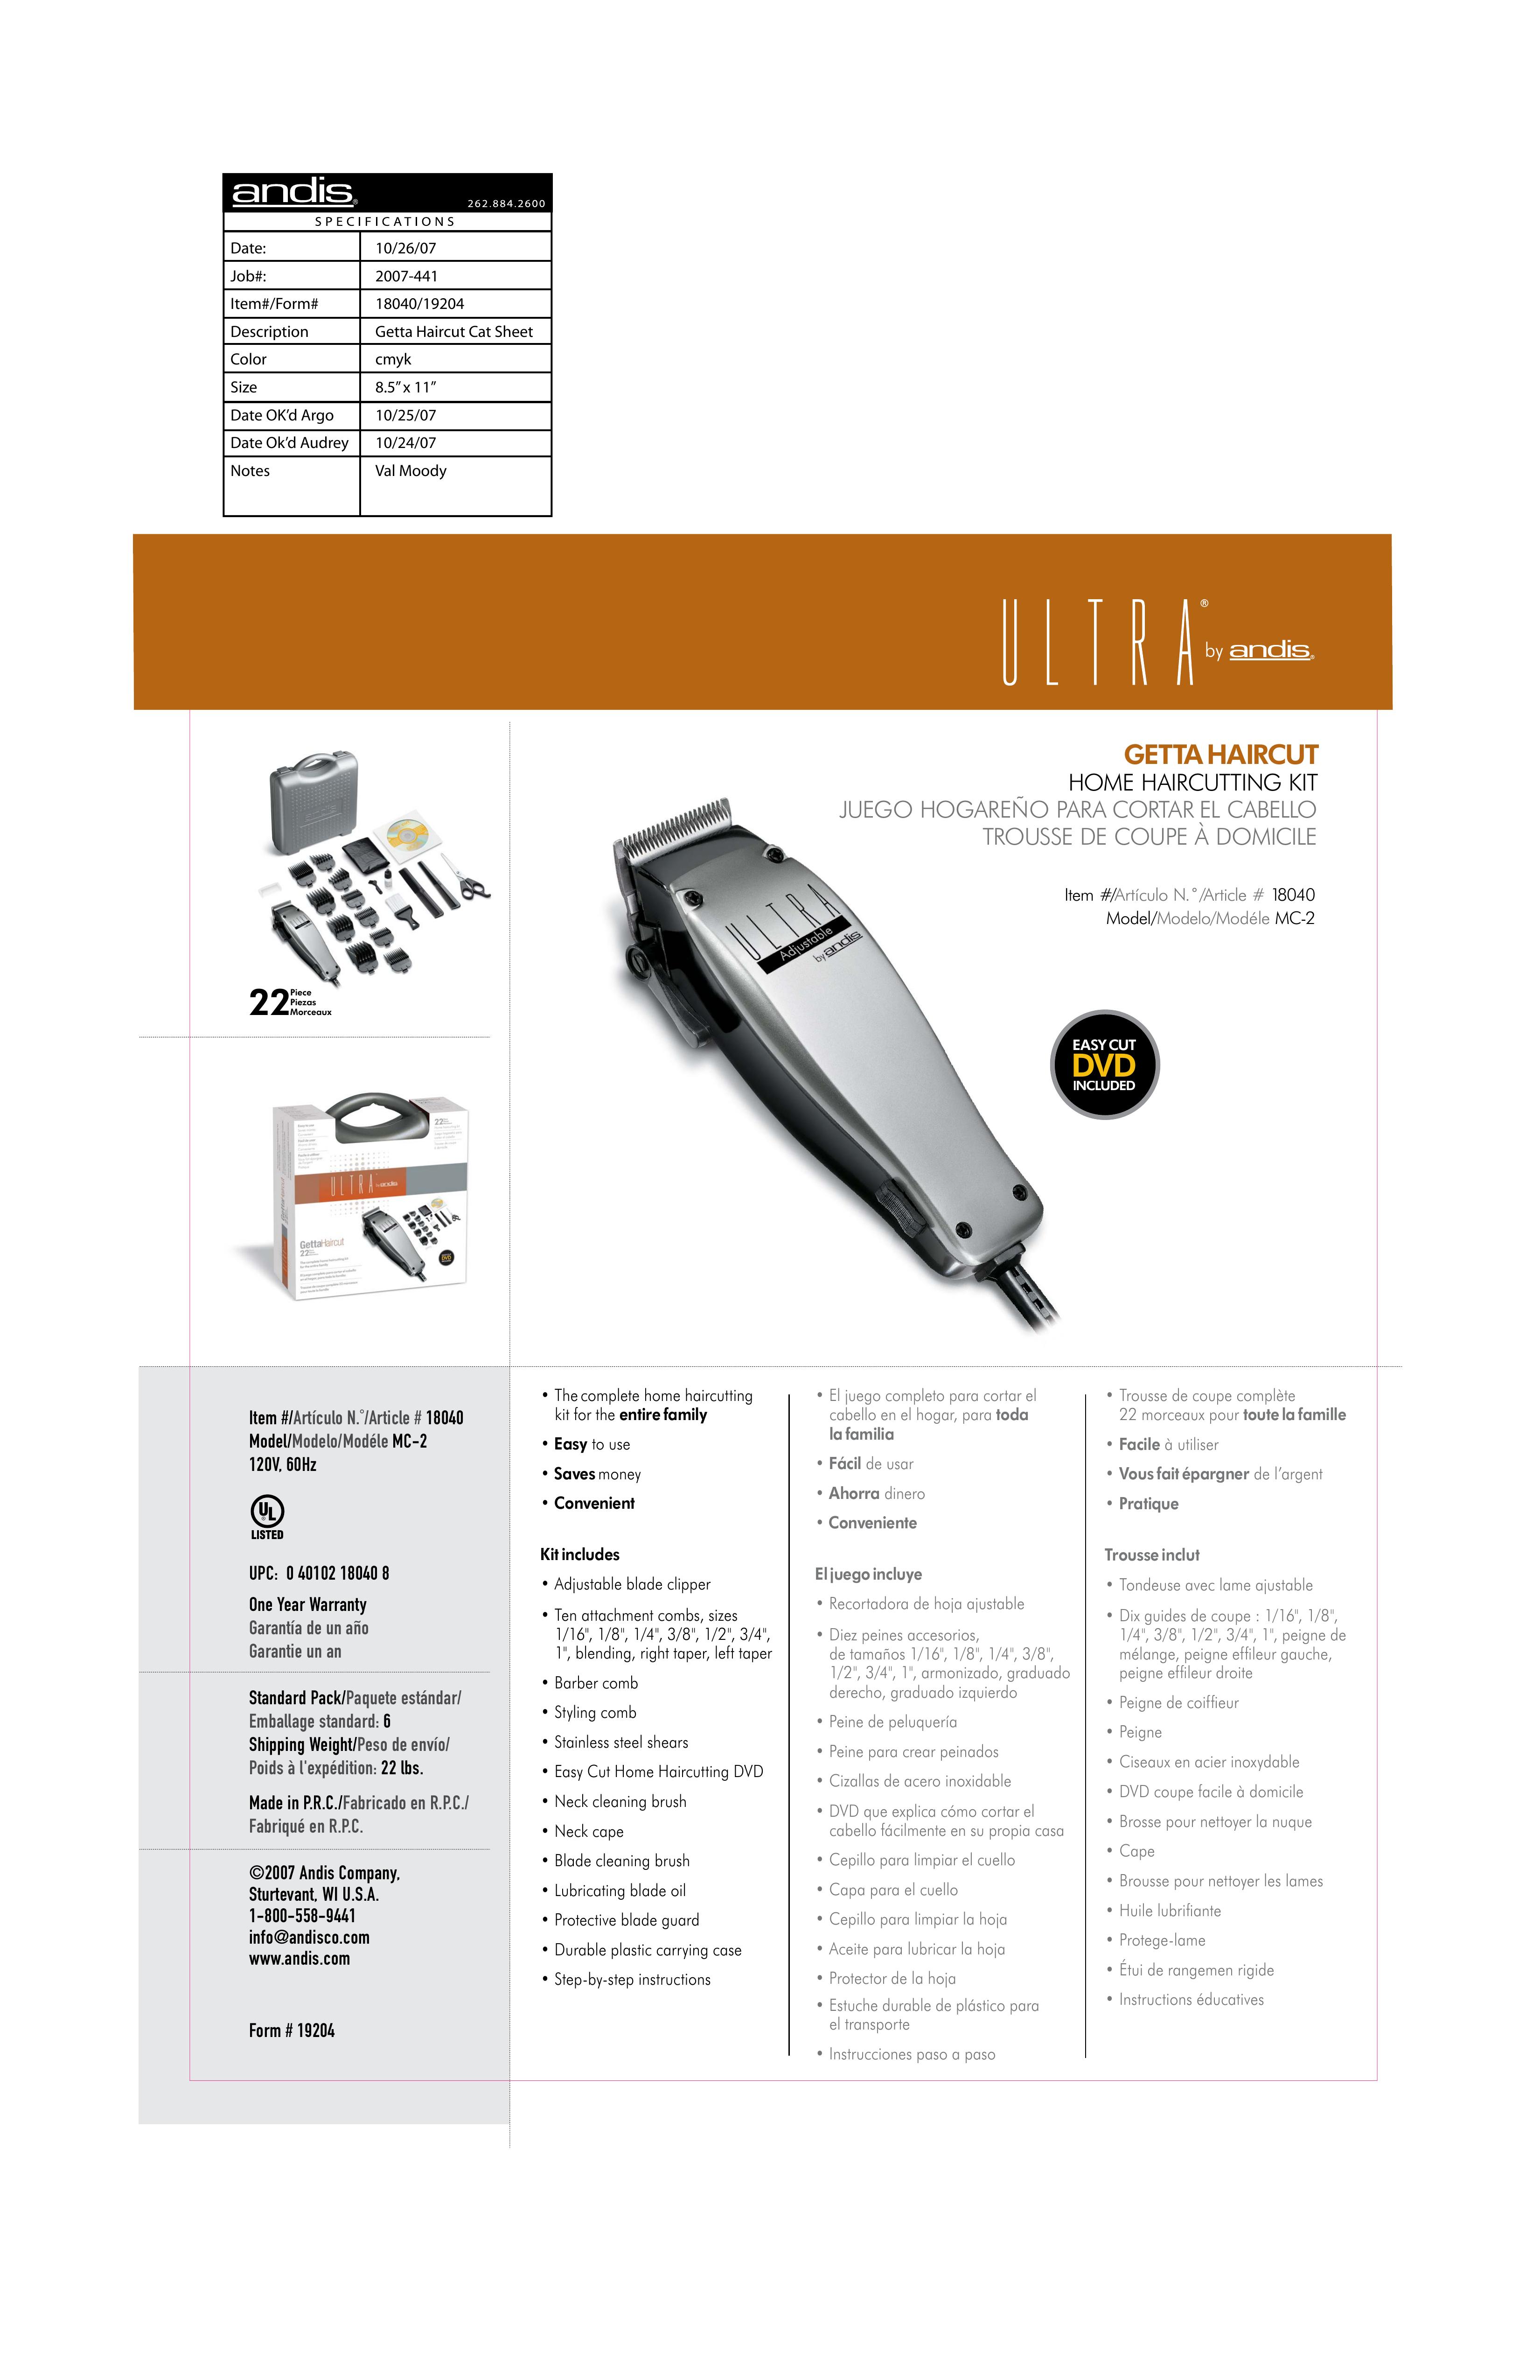 Andis Company 18040 Hair Clippers User Manual